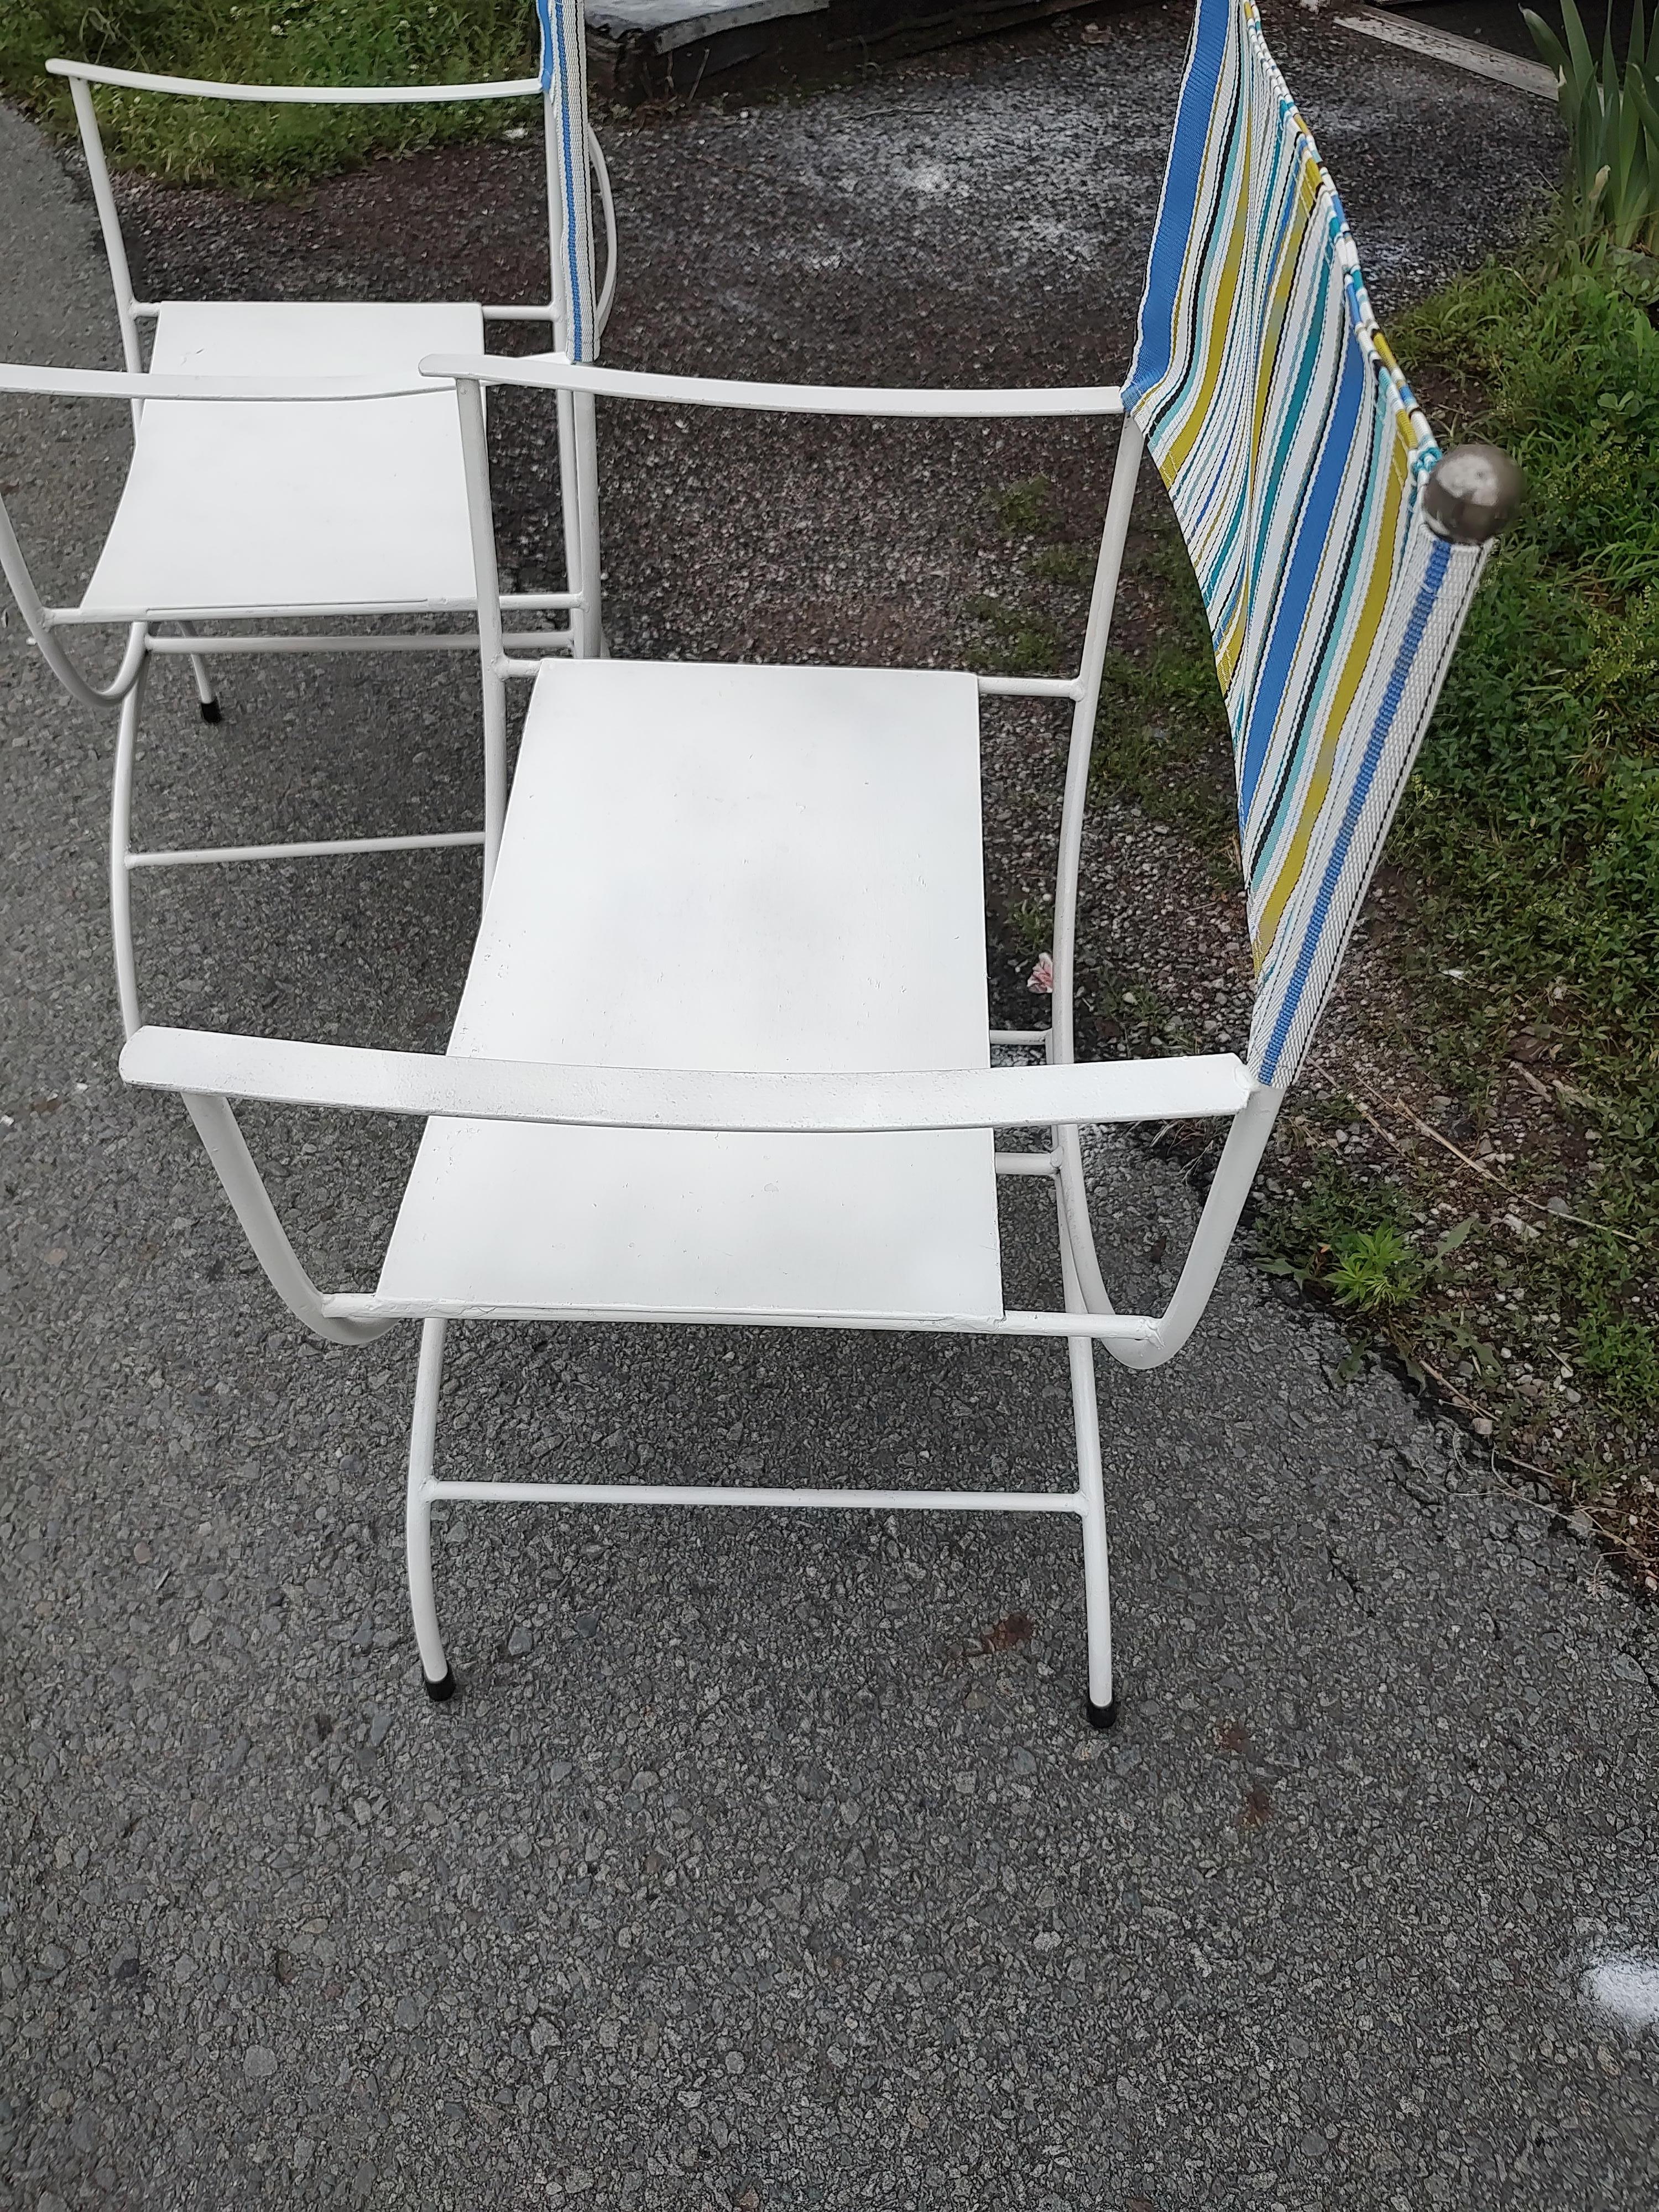 Pair of Mid Century Modern Patio Directors Chairs with Sunbrella Backs 1960 For Sale 6